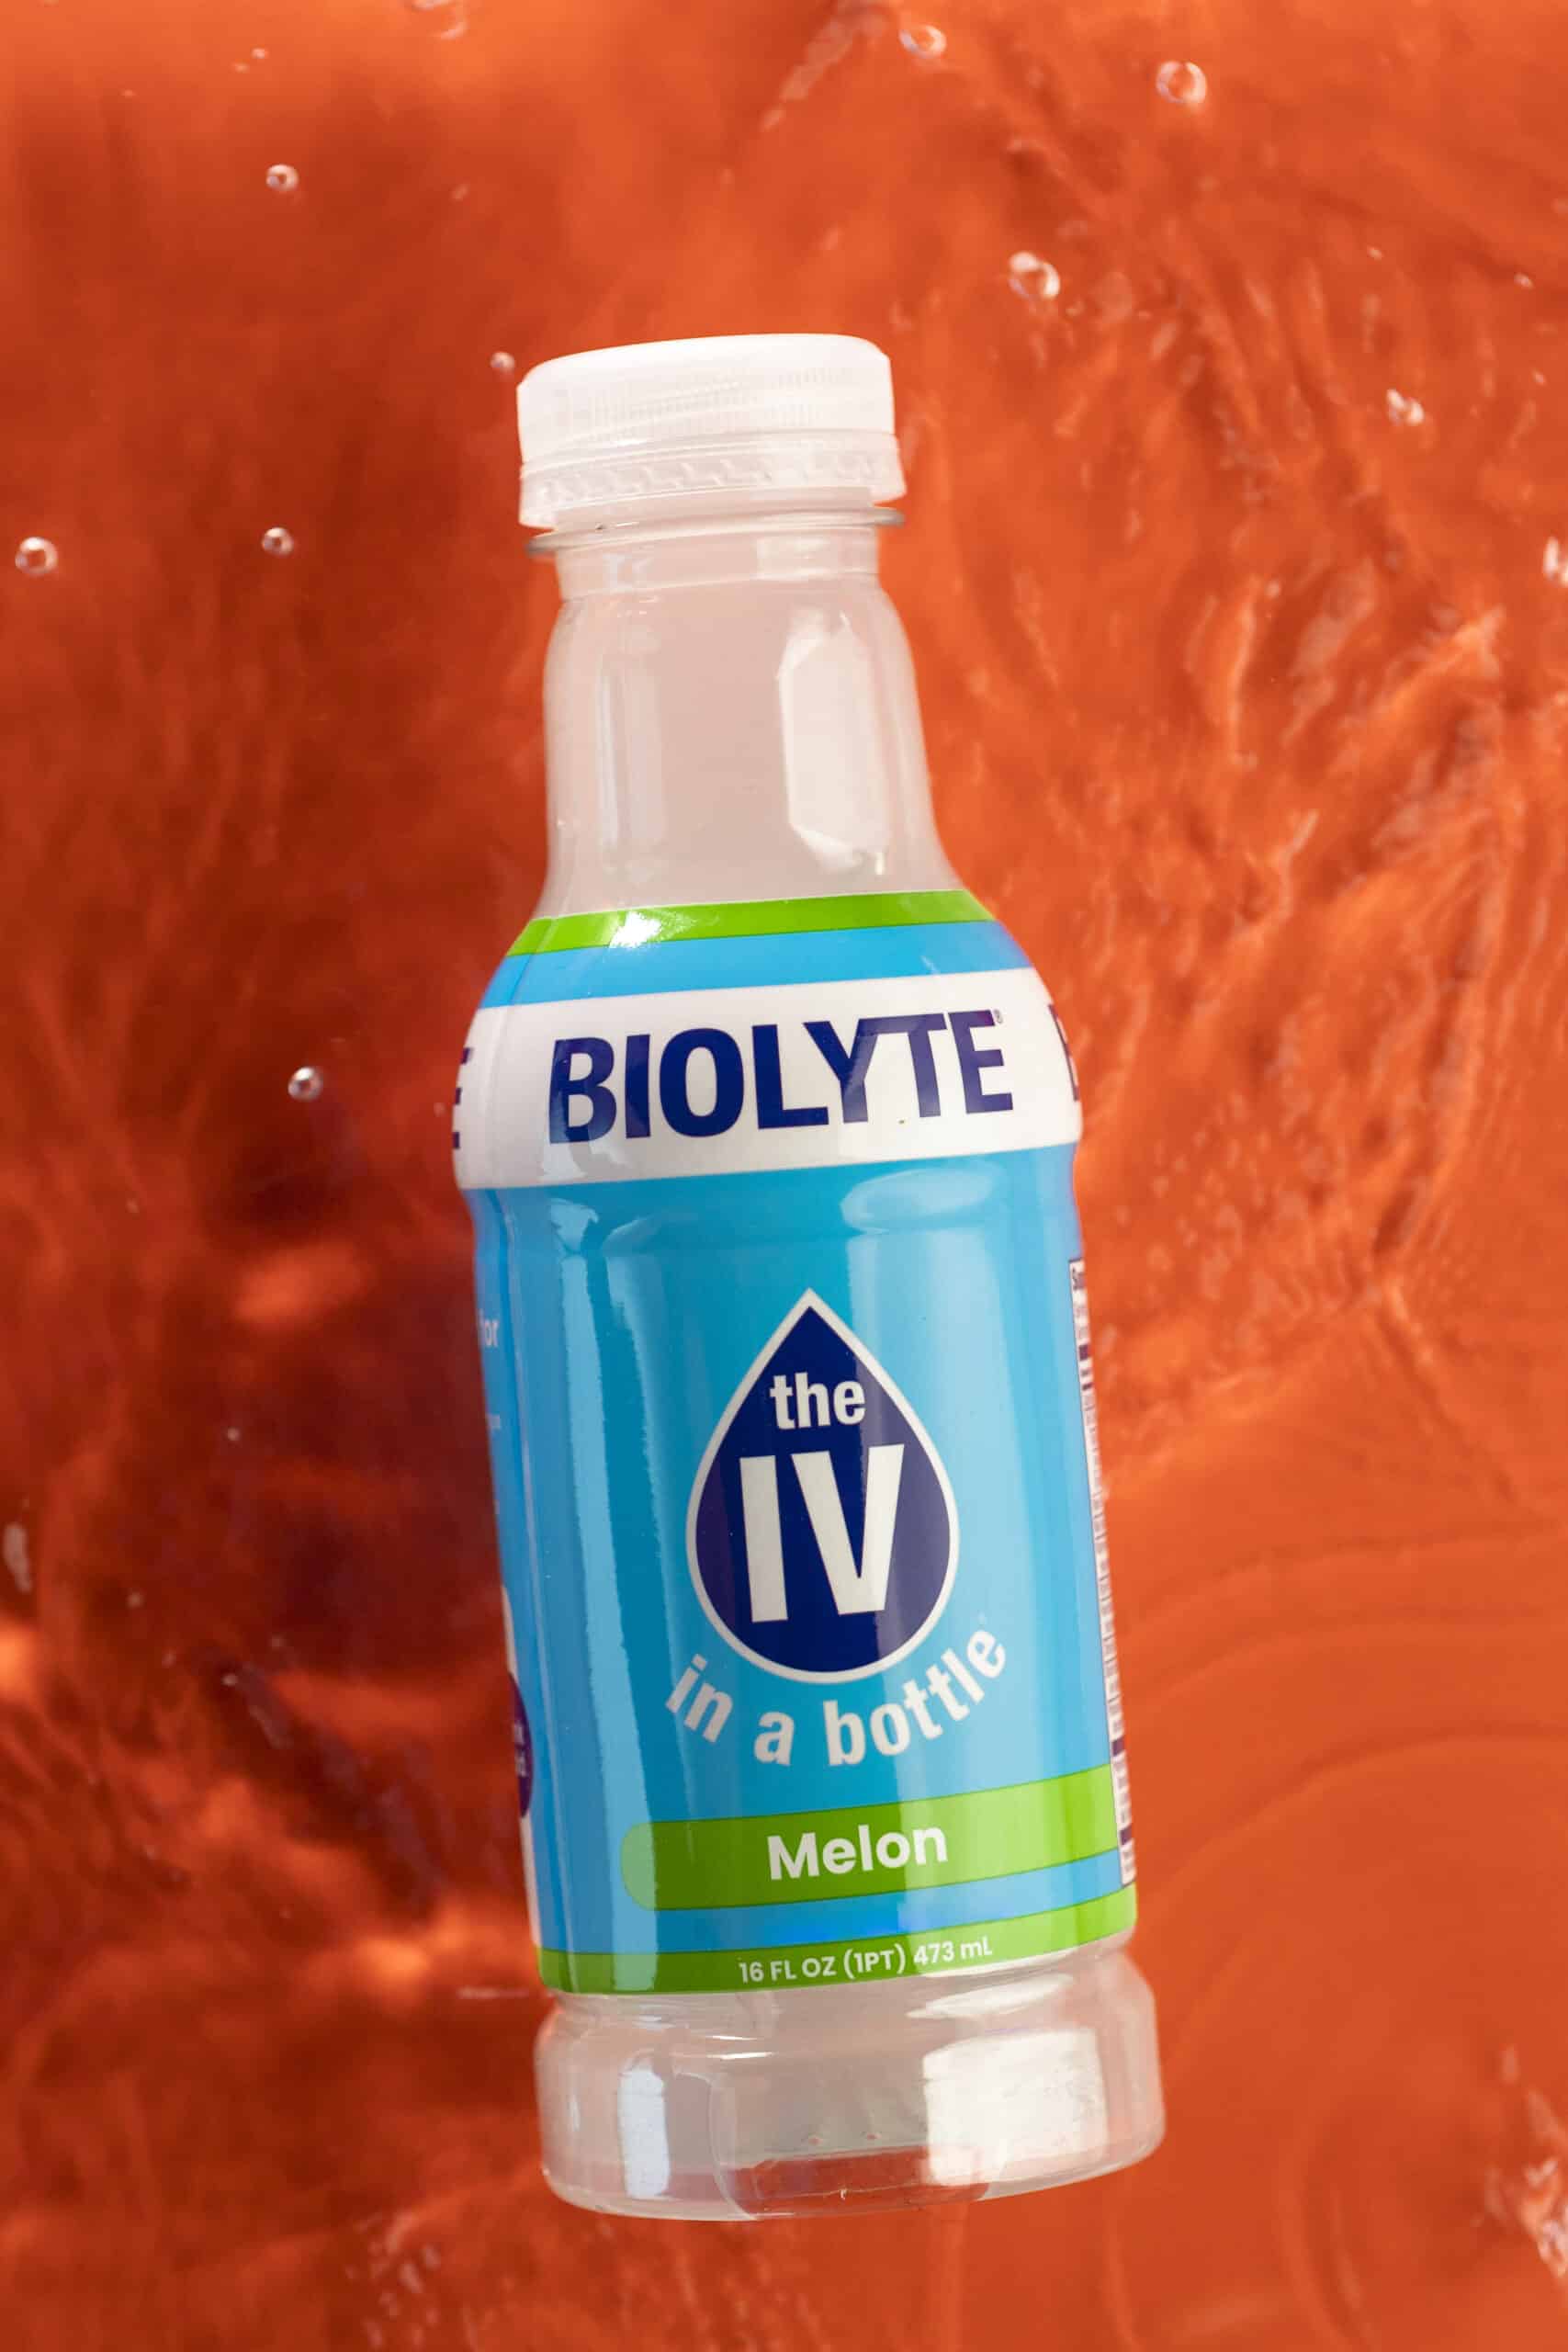 Biolyte Product Photography Assets